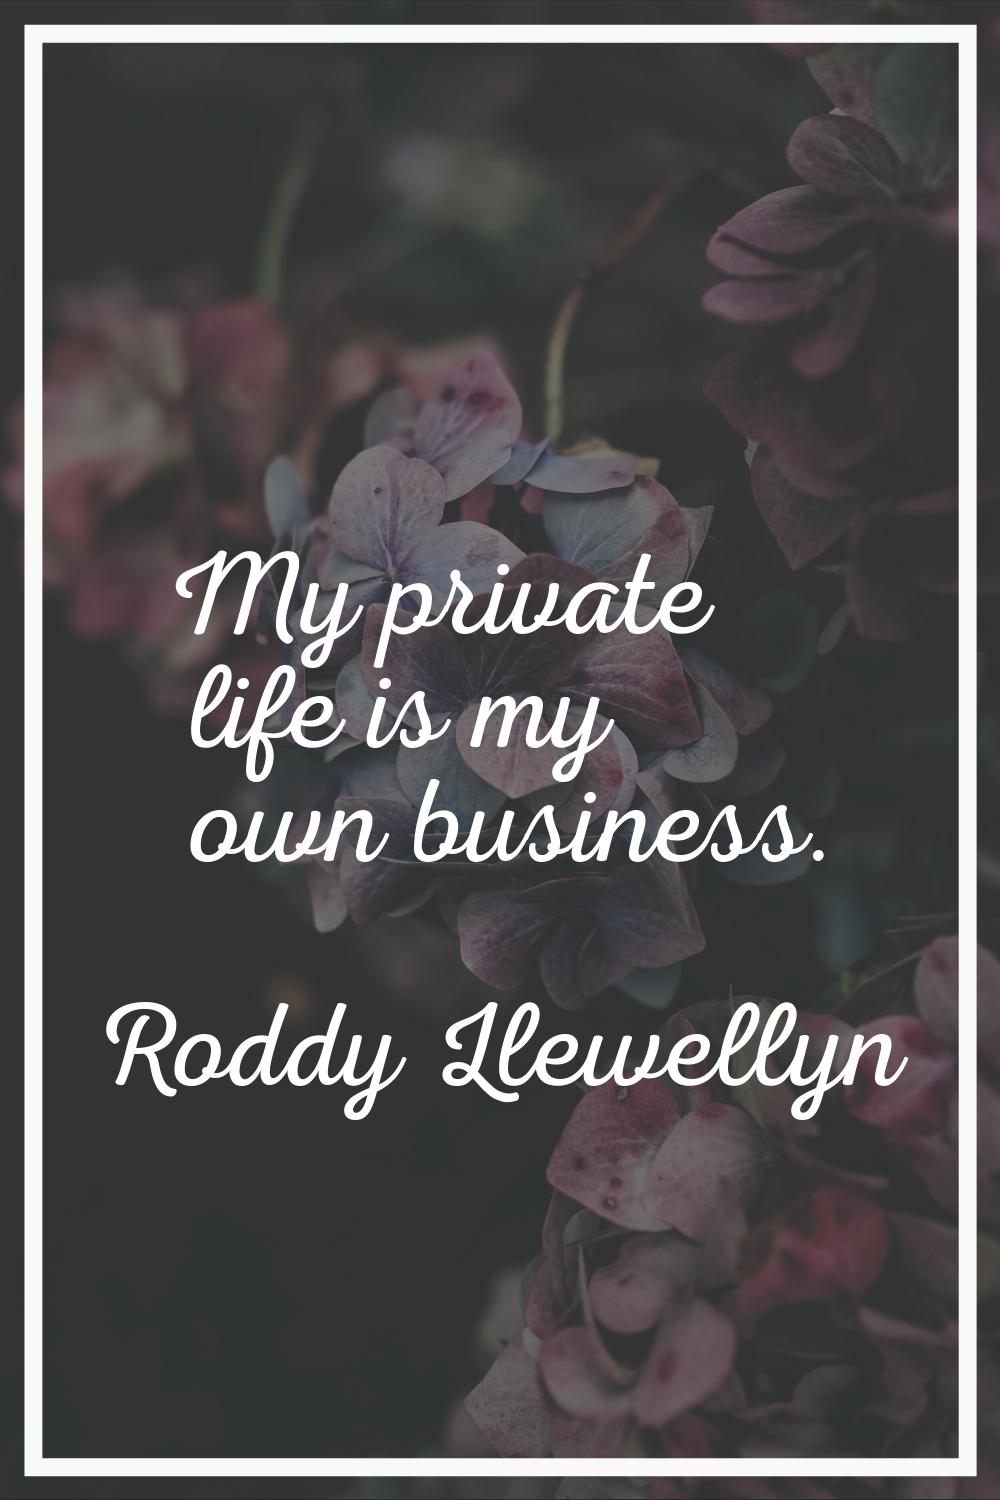 My private life is my own business.